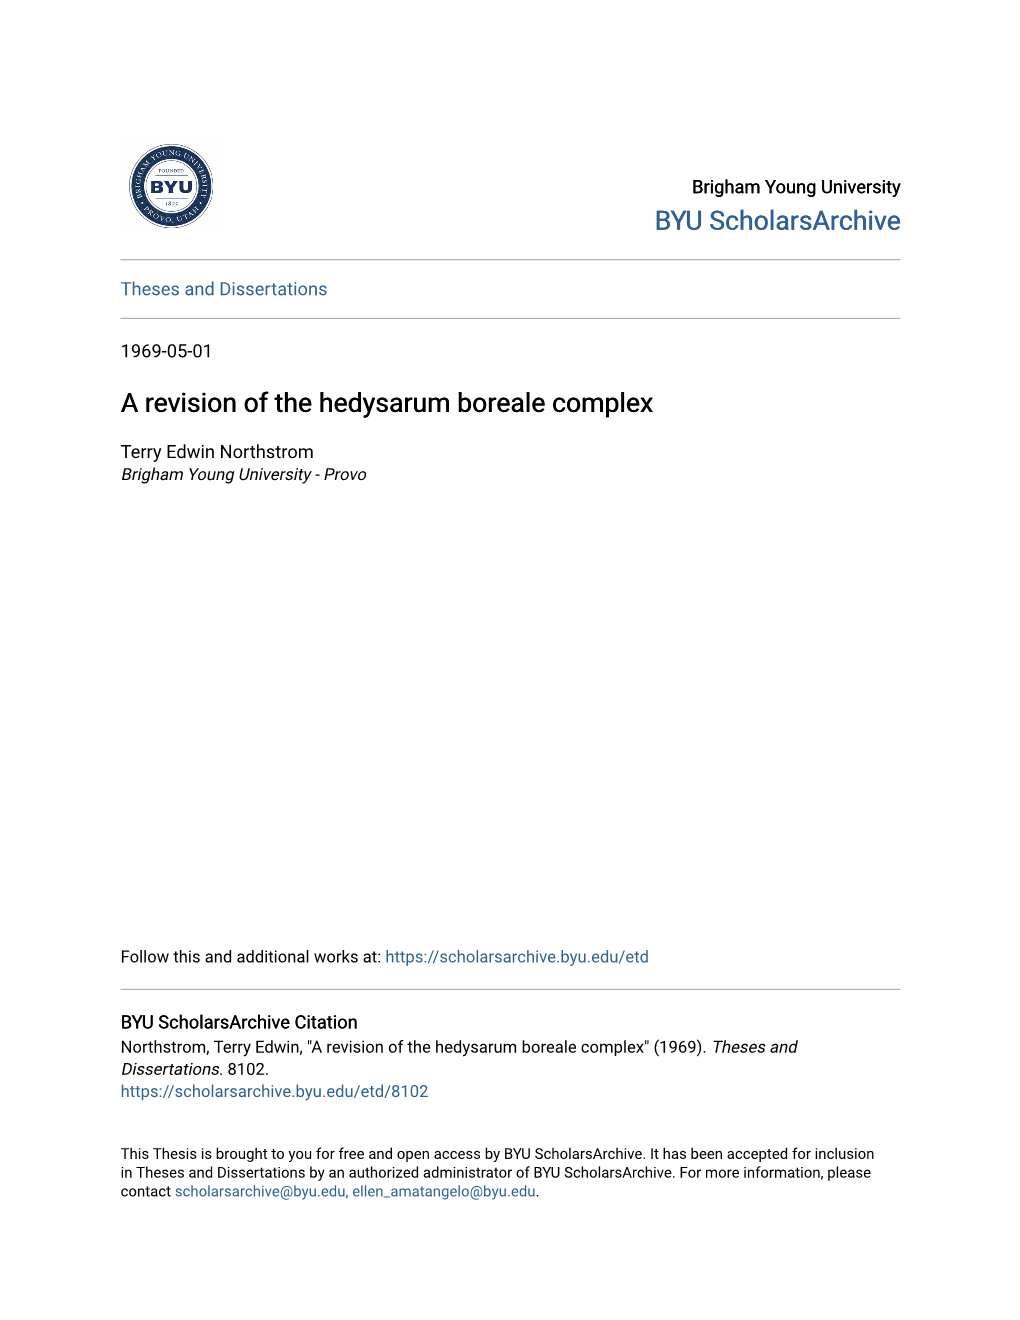 A Revision of the Hedysarum Boreale Complex